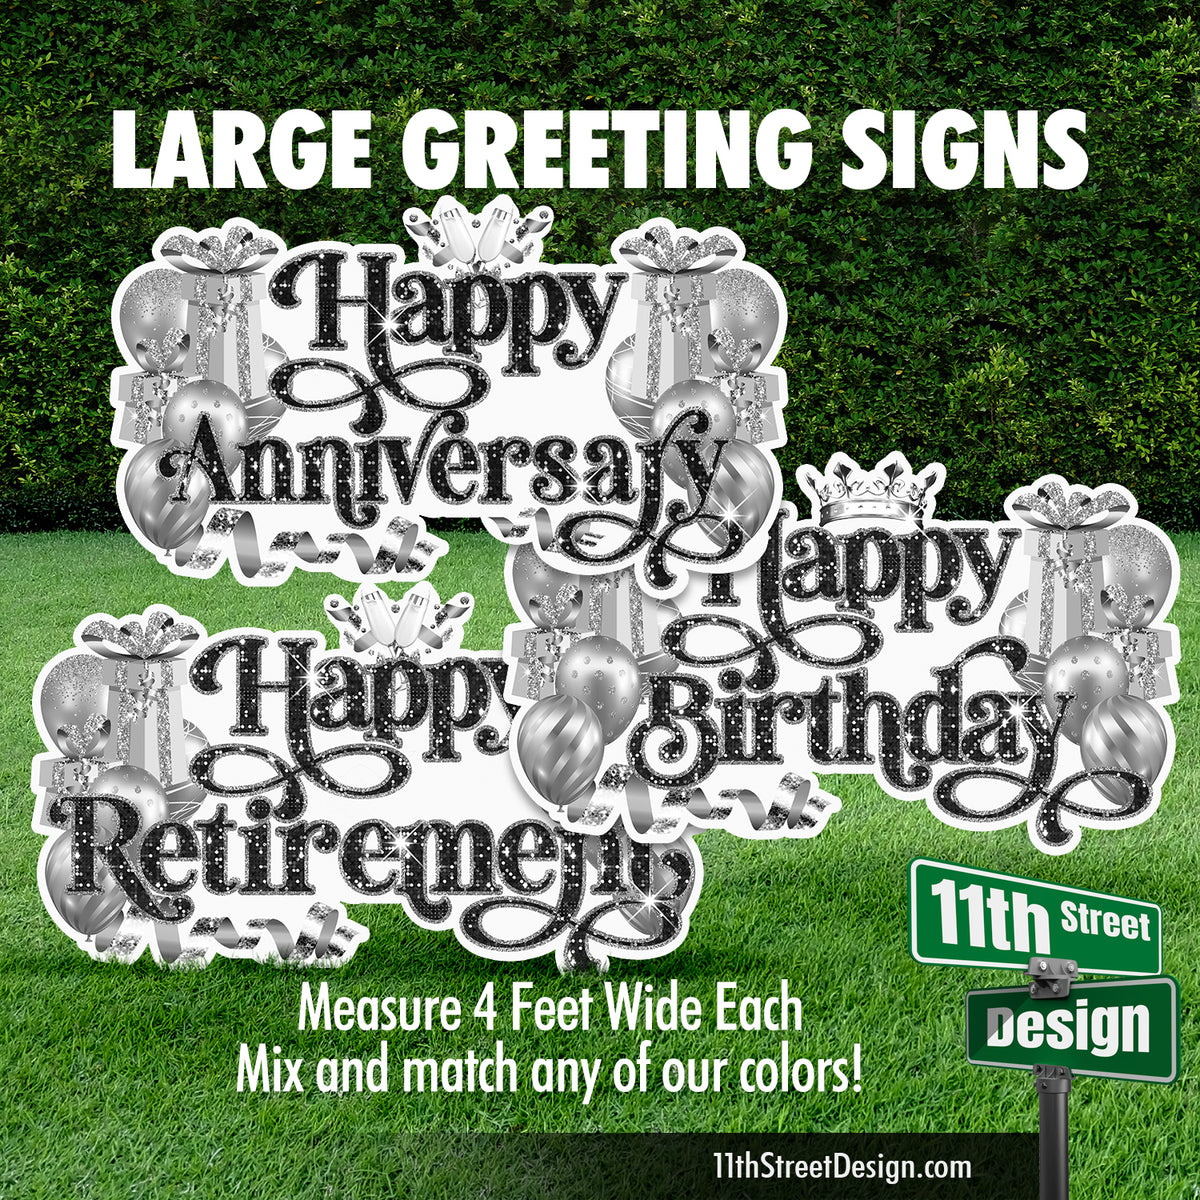 Multi Occasion Large Greeting Signs - Anniversary, Retirement, Happy Birthday - Celebration Flair